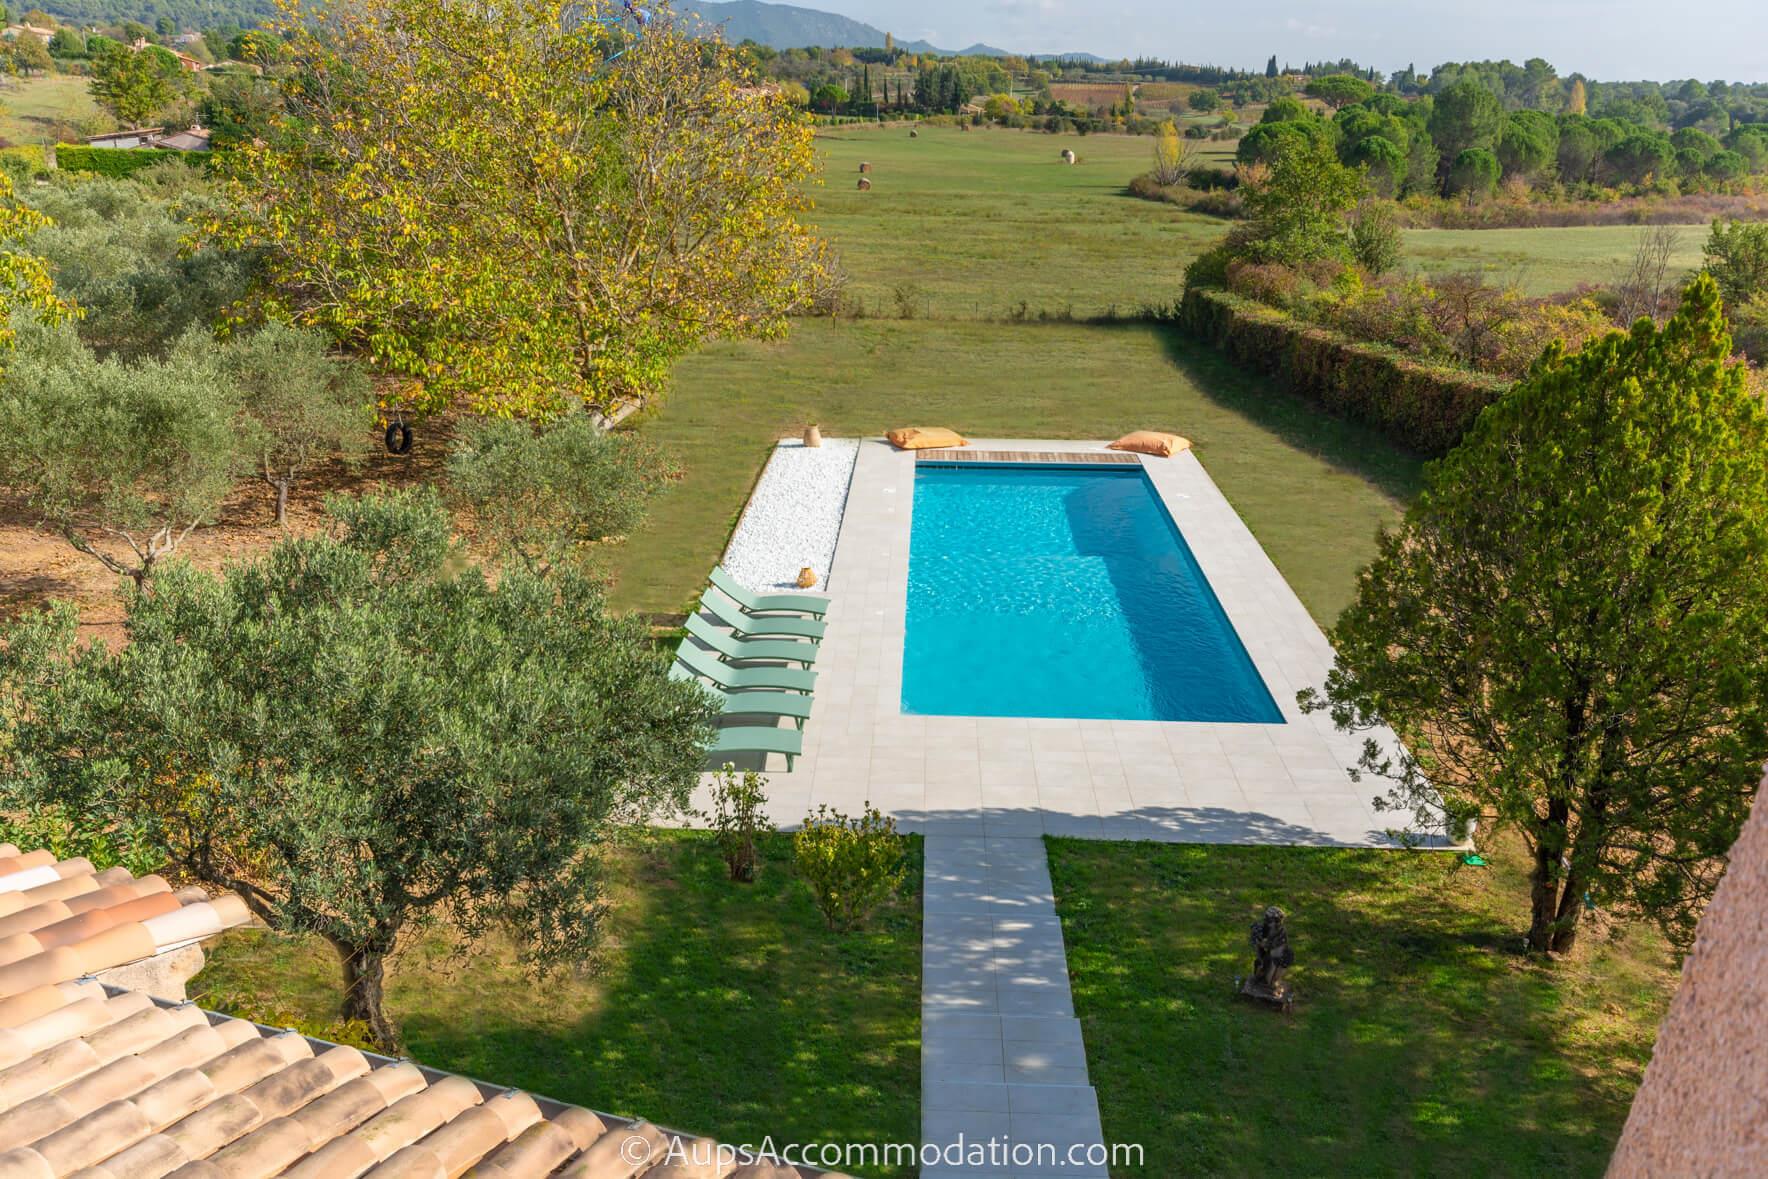 Le Mas Aups - Located in 5000m2 of grounds including olive trees, fruit trees and plenty of privacy